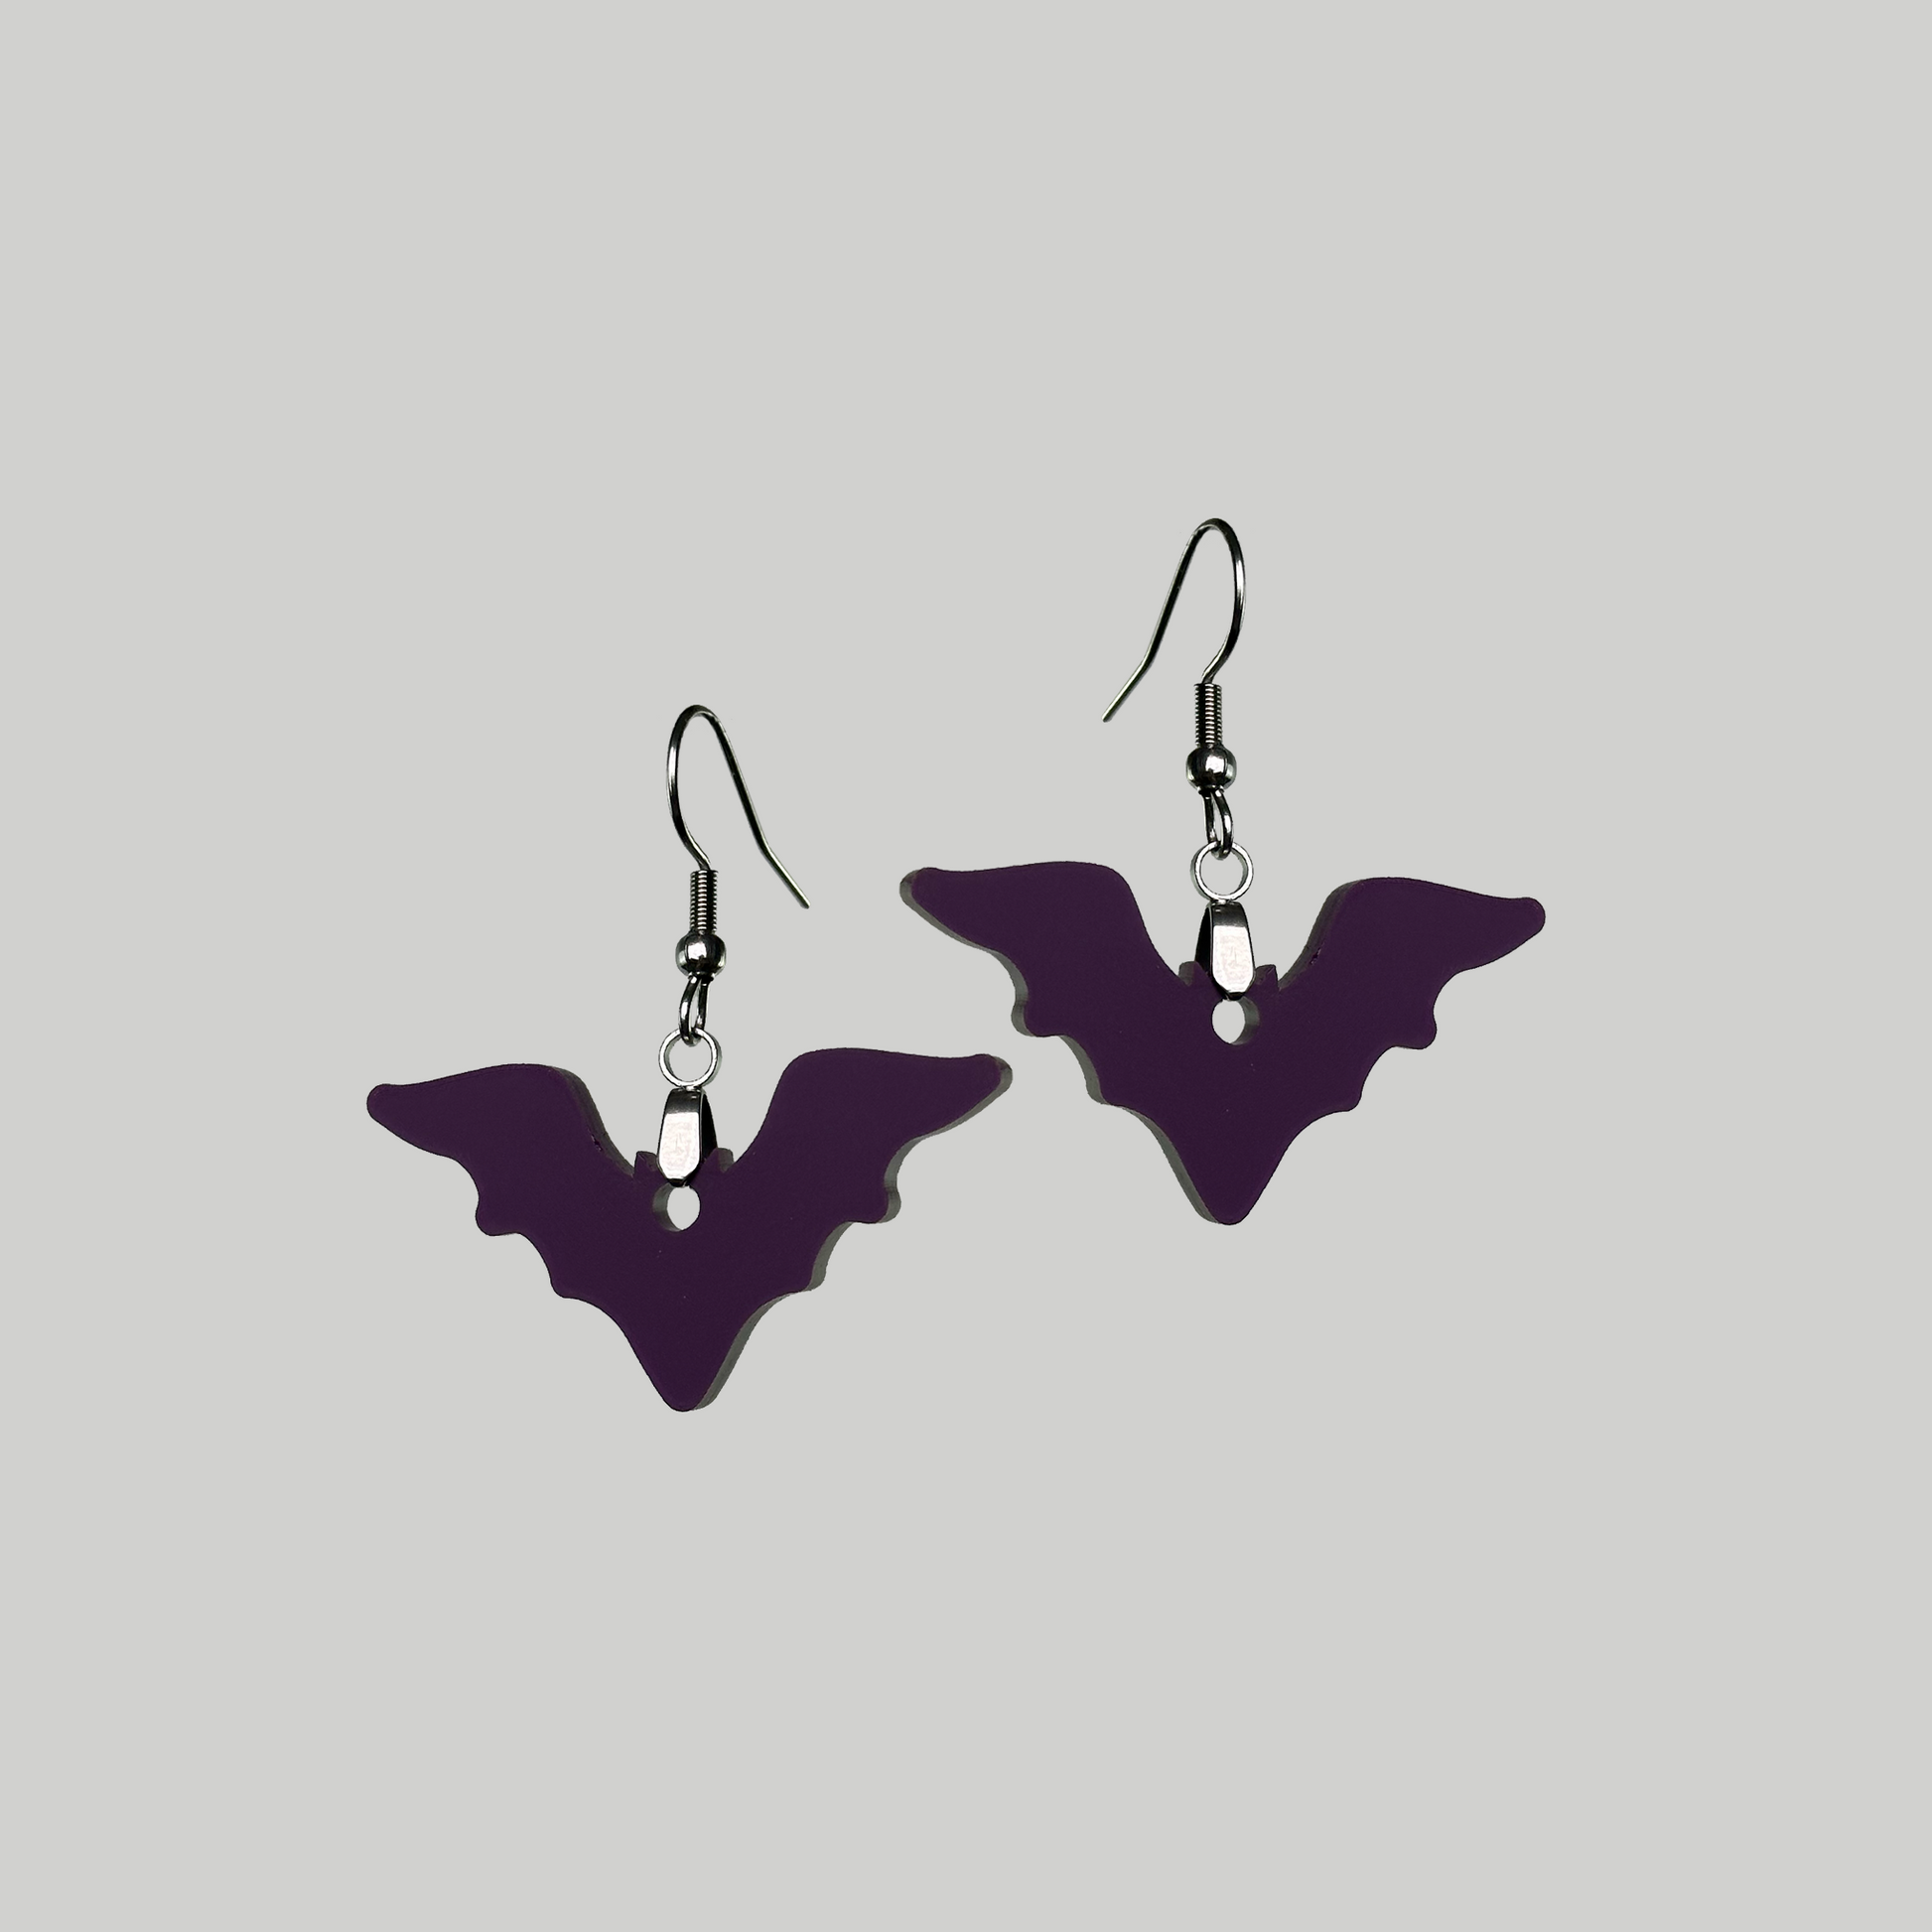 Sleek Bat Silhouette Earrings: Edgy and modern, these bat-inspired earrings make a bold fashion statement.